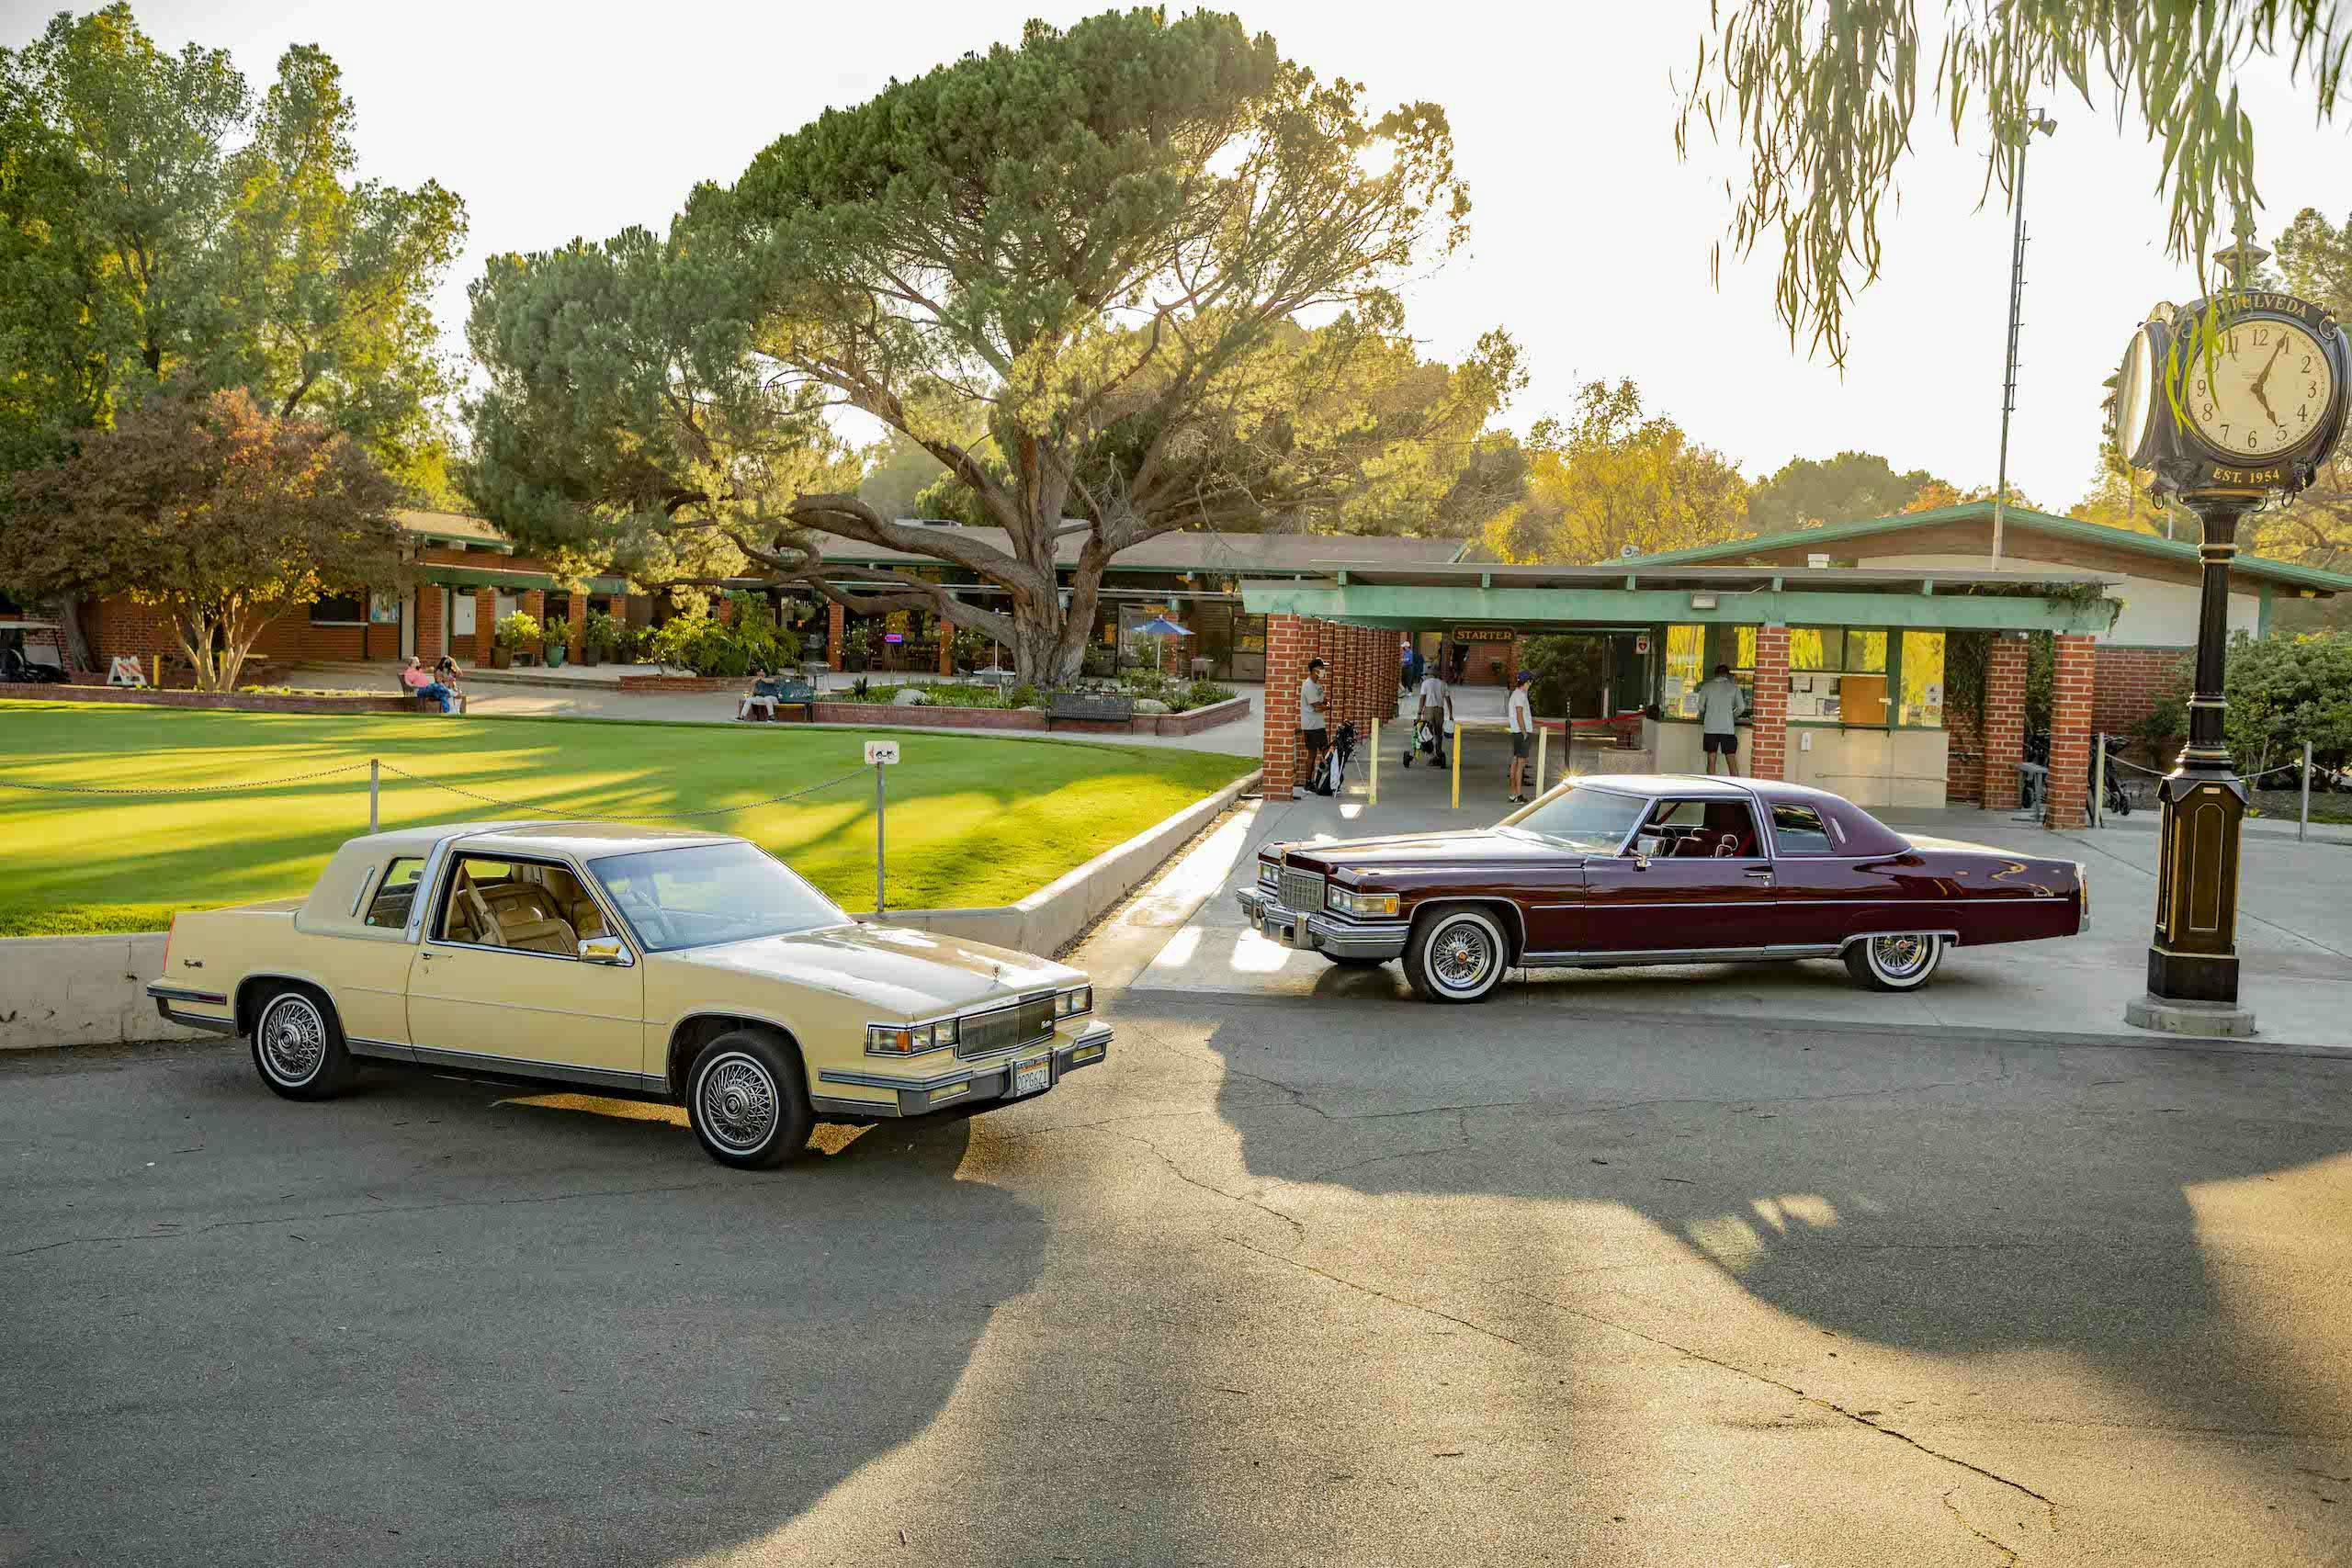 Cadillac Coupe DeVille 1976 and 1986 parked golf course